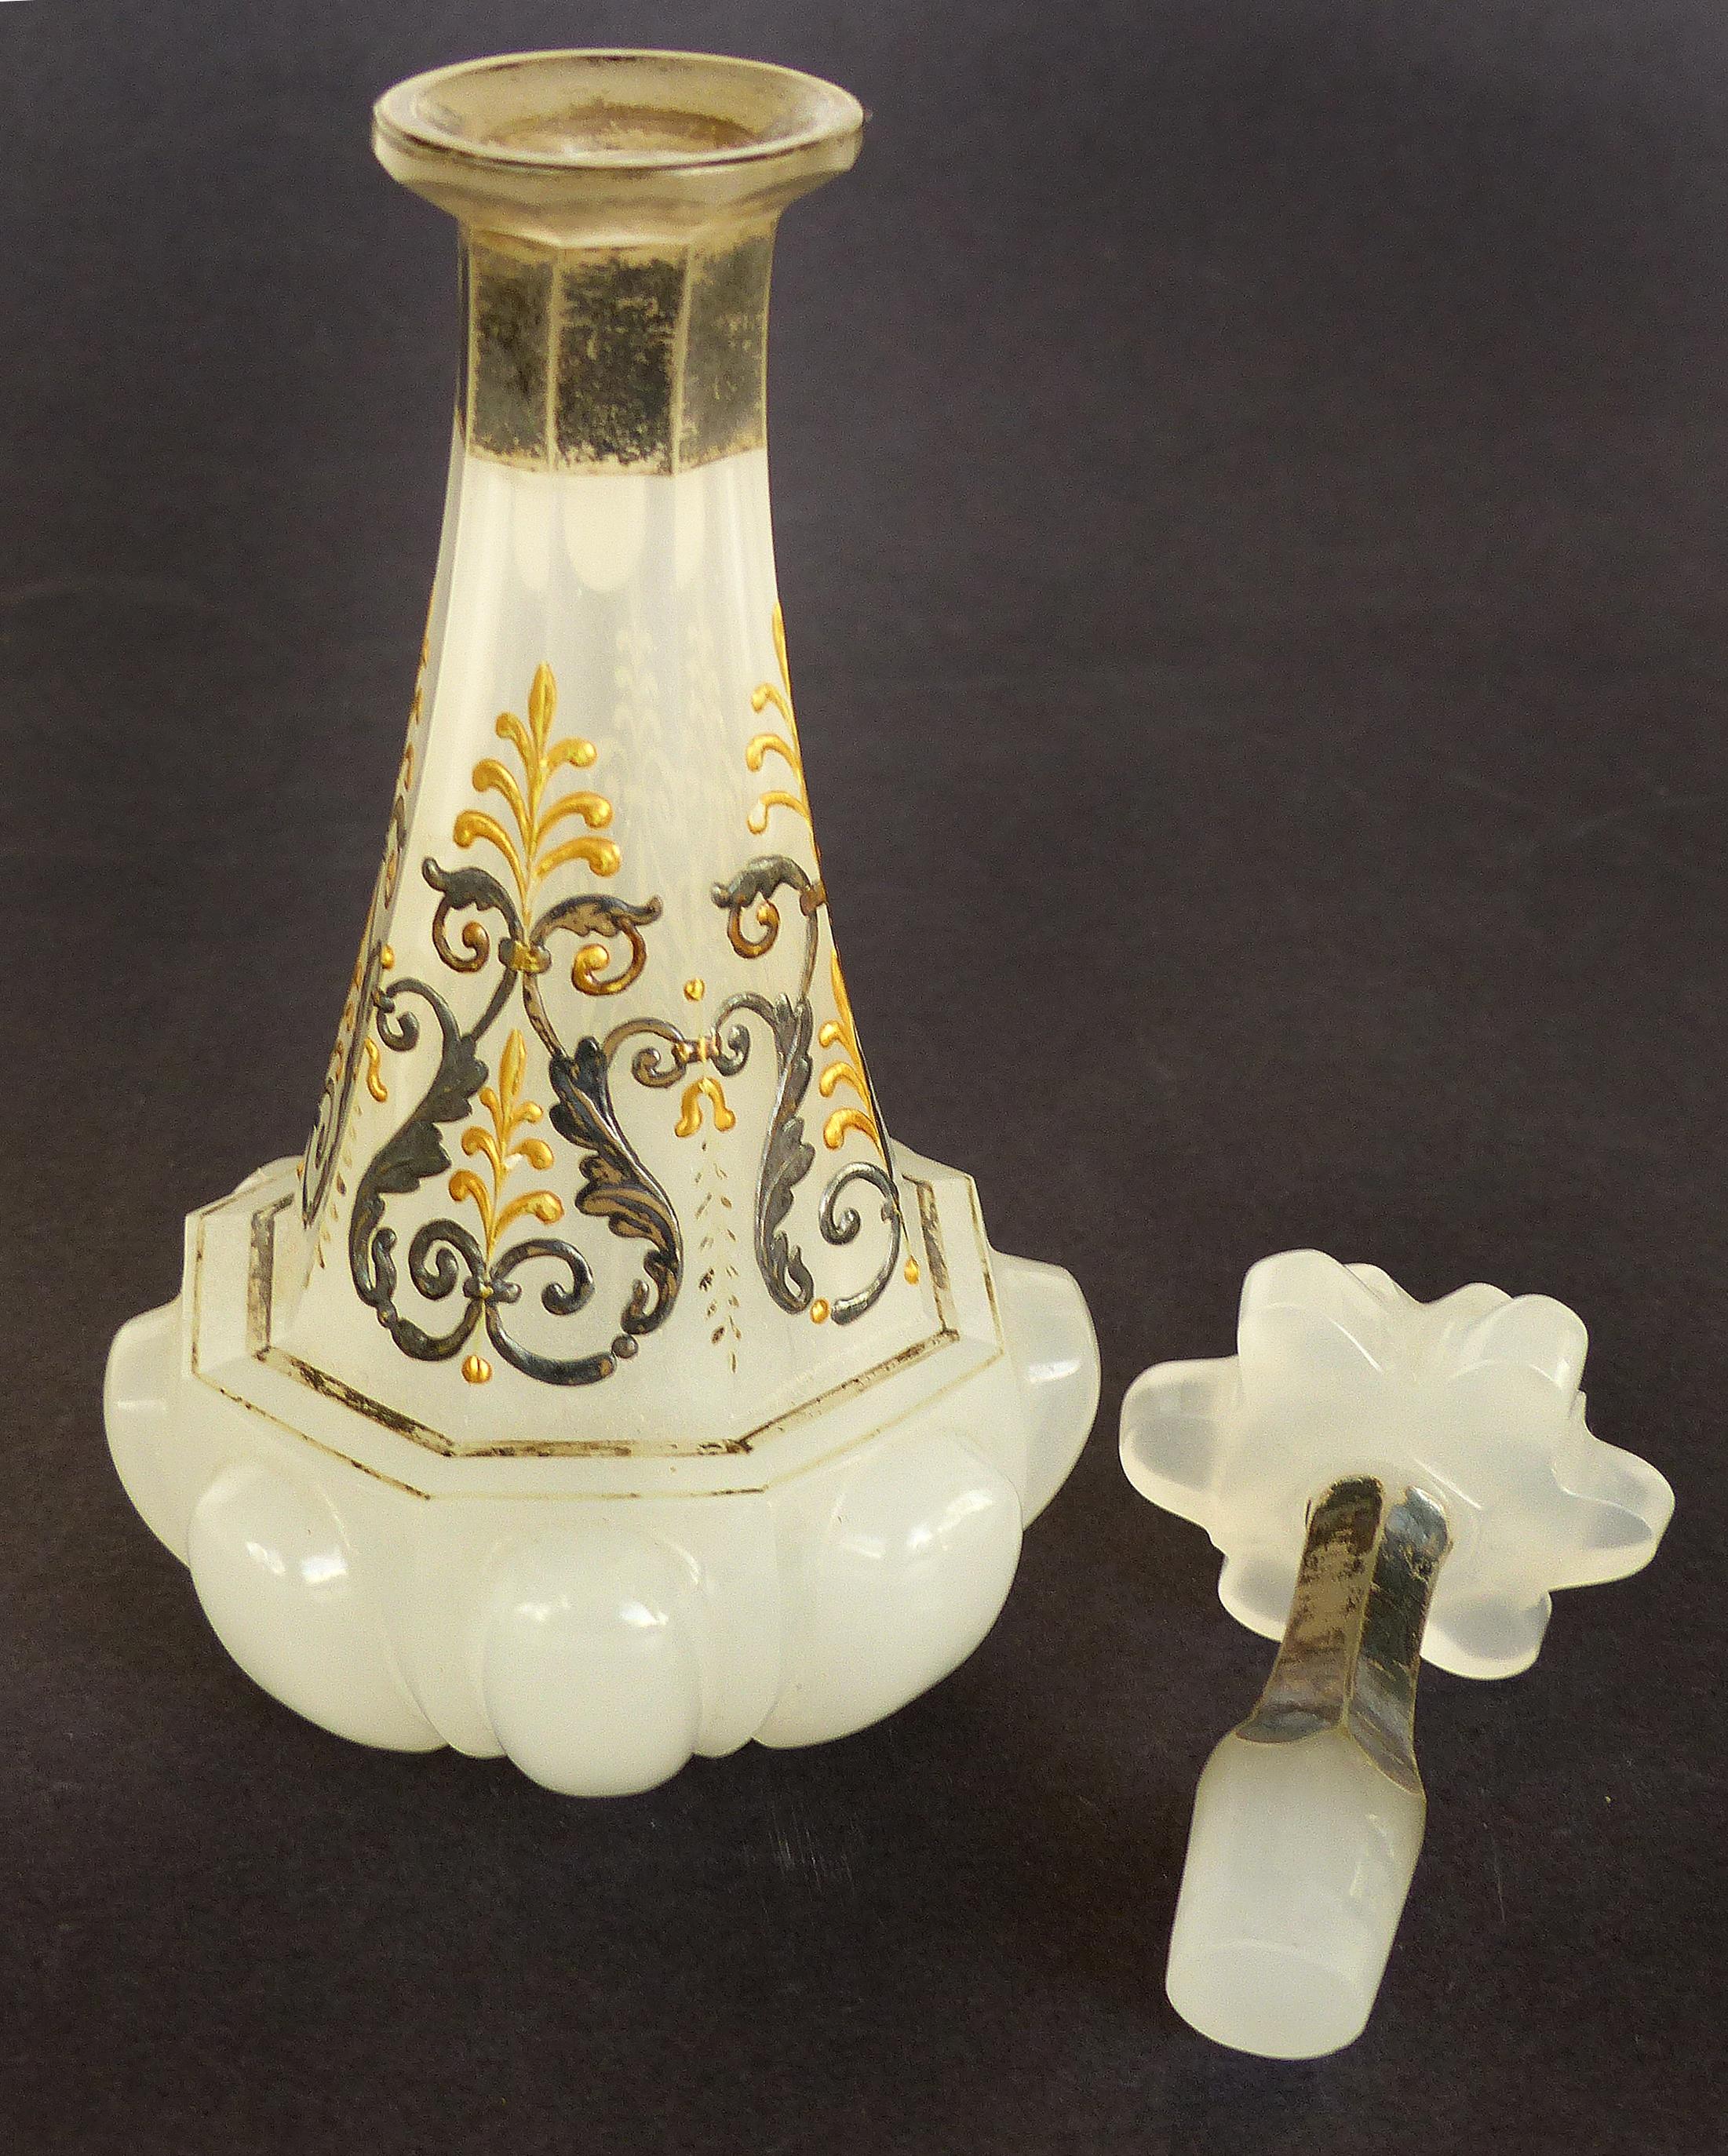 French Victorian Opaline Glass Enameled Scent Bottle with Stopper

Offered for sale is a fine quality French Victorian opaline glass scent bottle with raised enameled decoration and it's the original stopper. This beautifully shaped bottle is from a